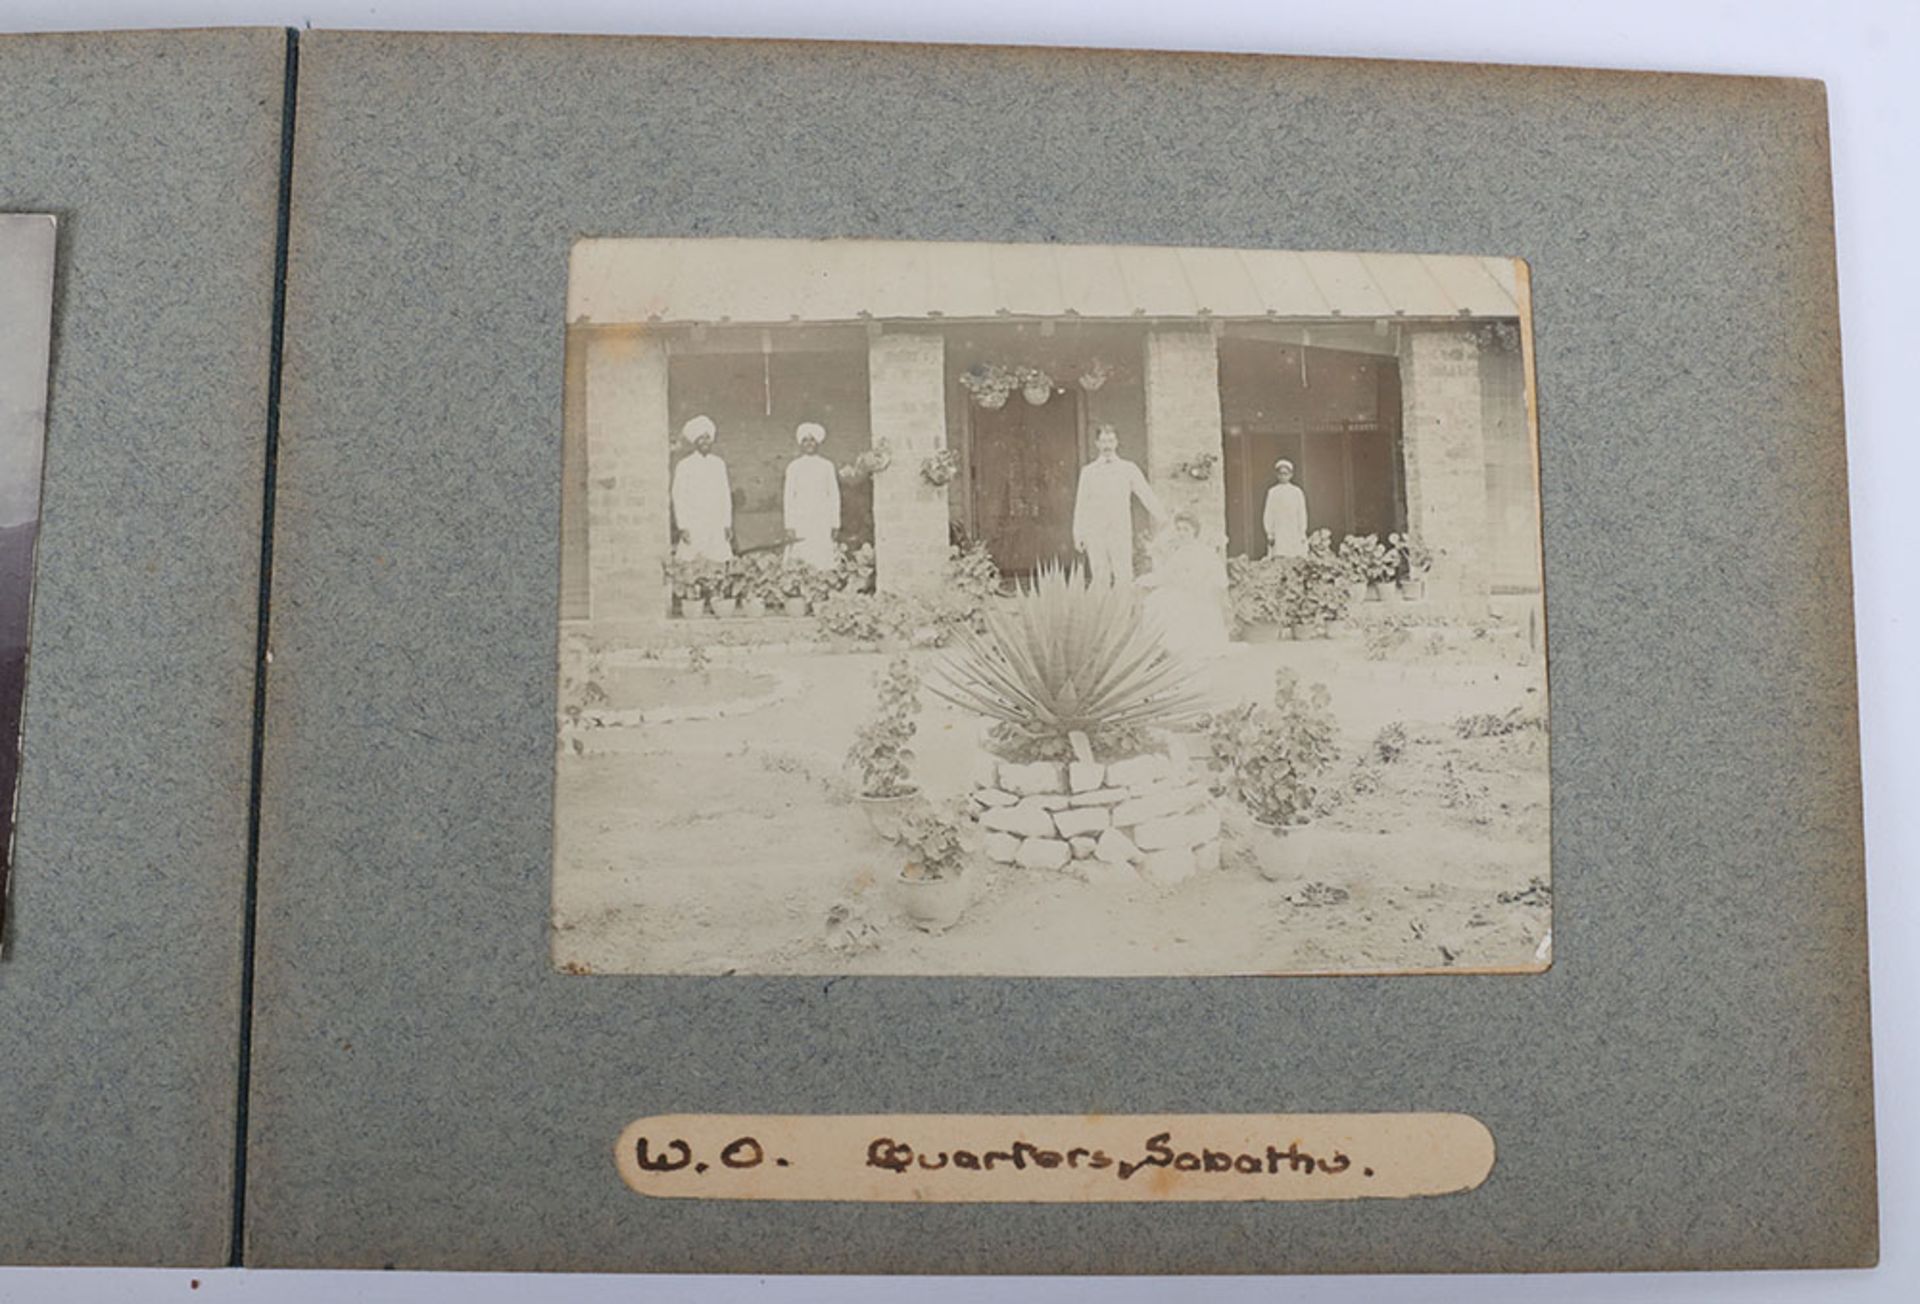 Photograph Album with images of ther Delhi Durbar, troops lining streets, Elephants, sacred cows bel - Image 48 of 48